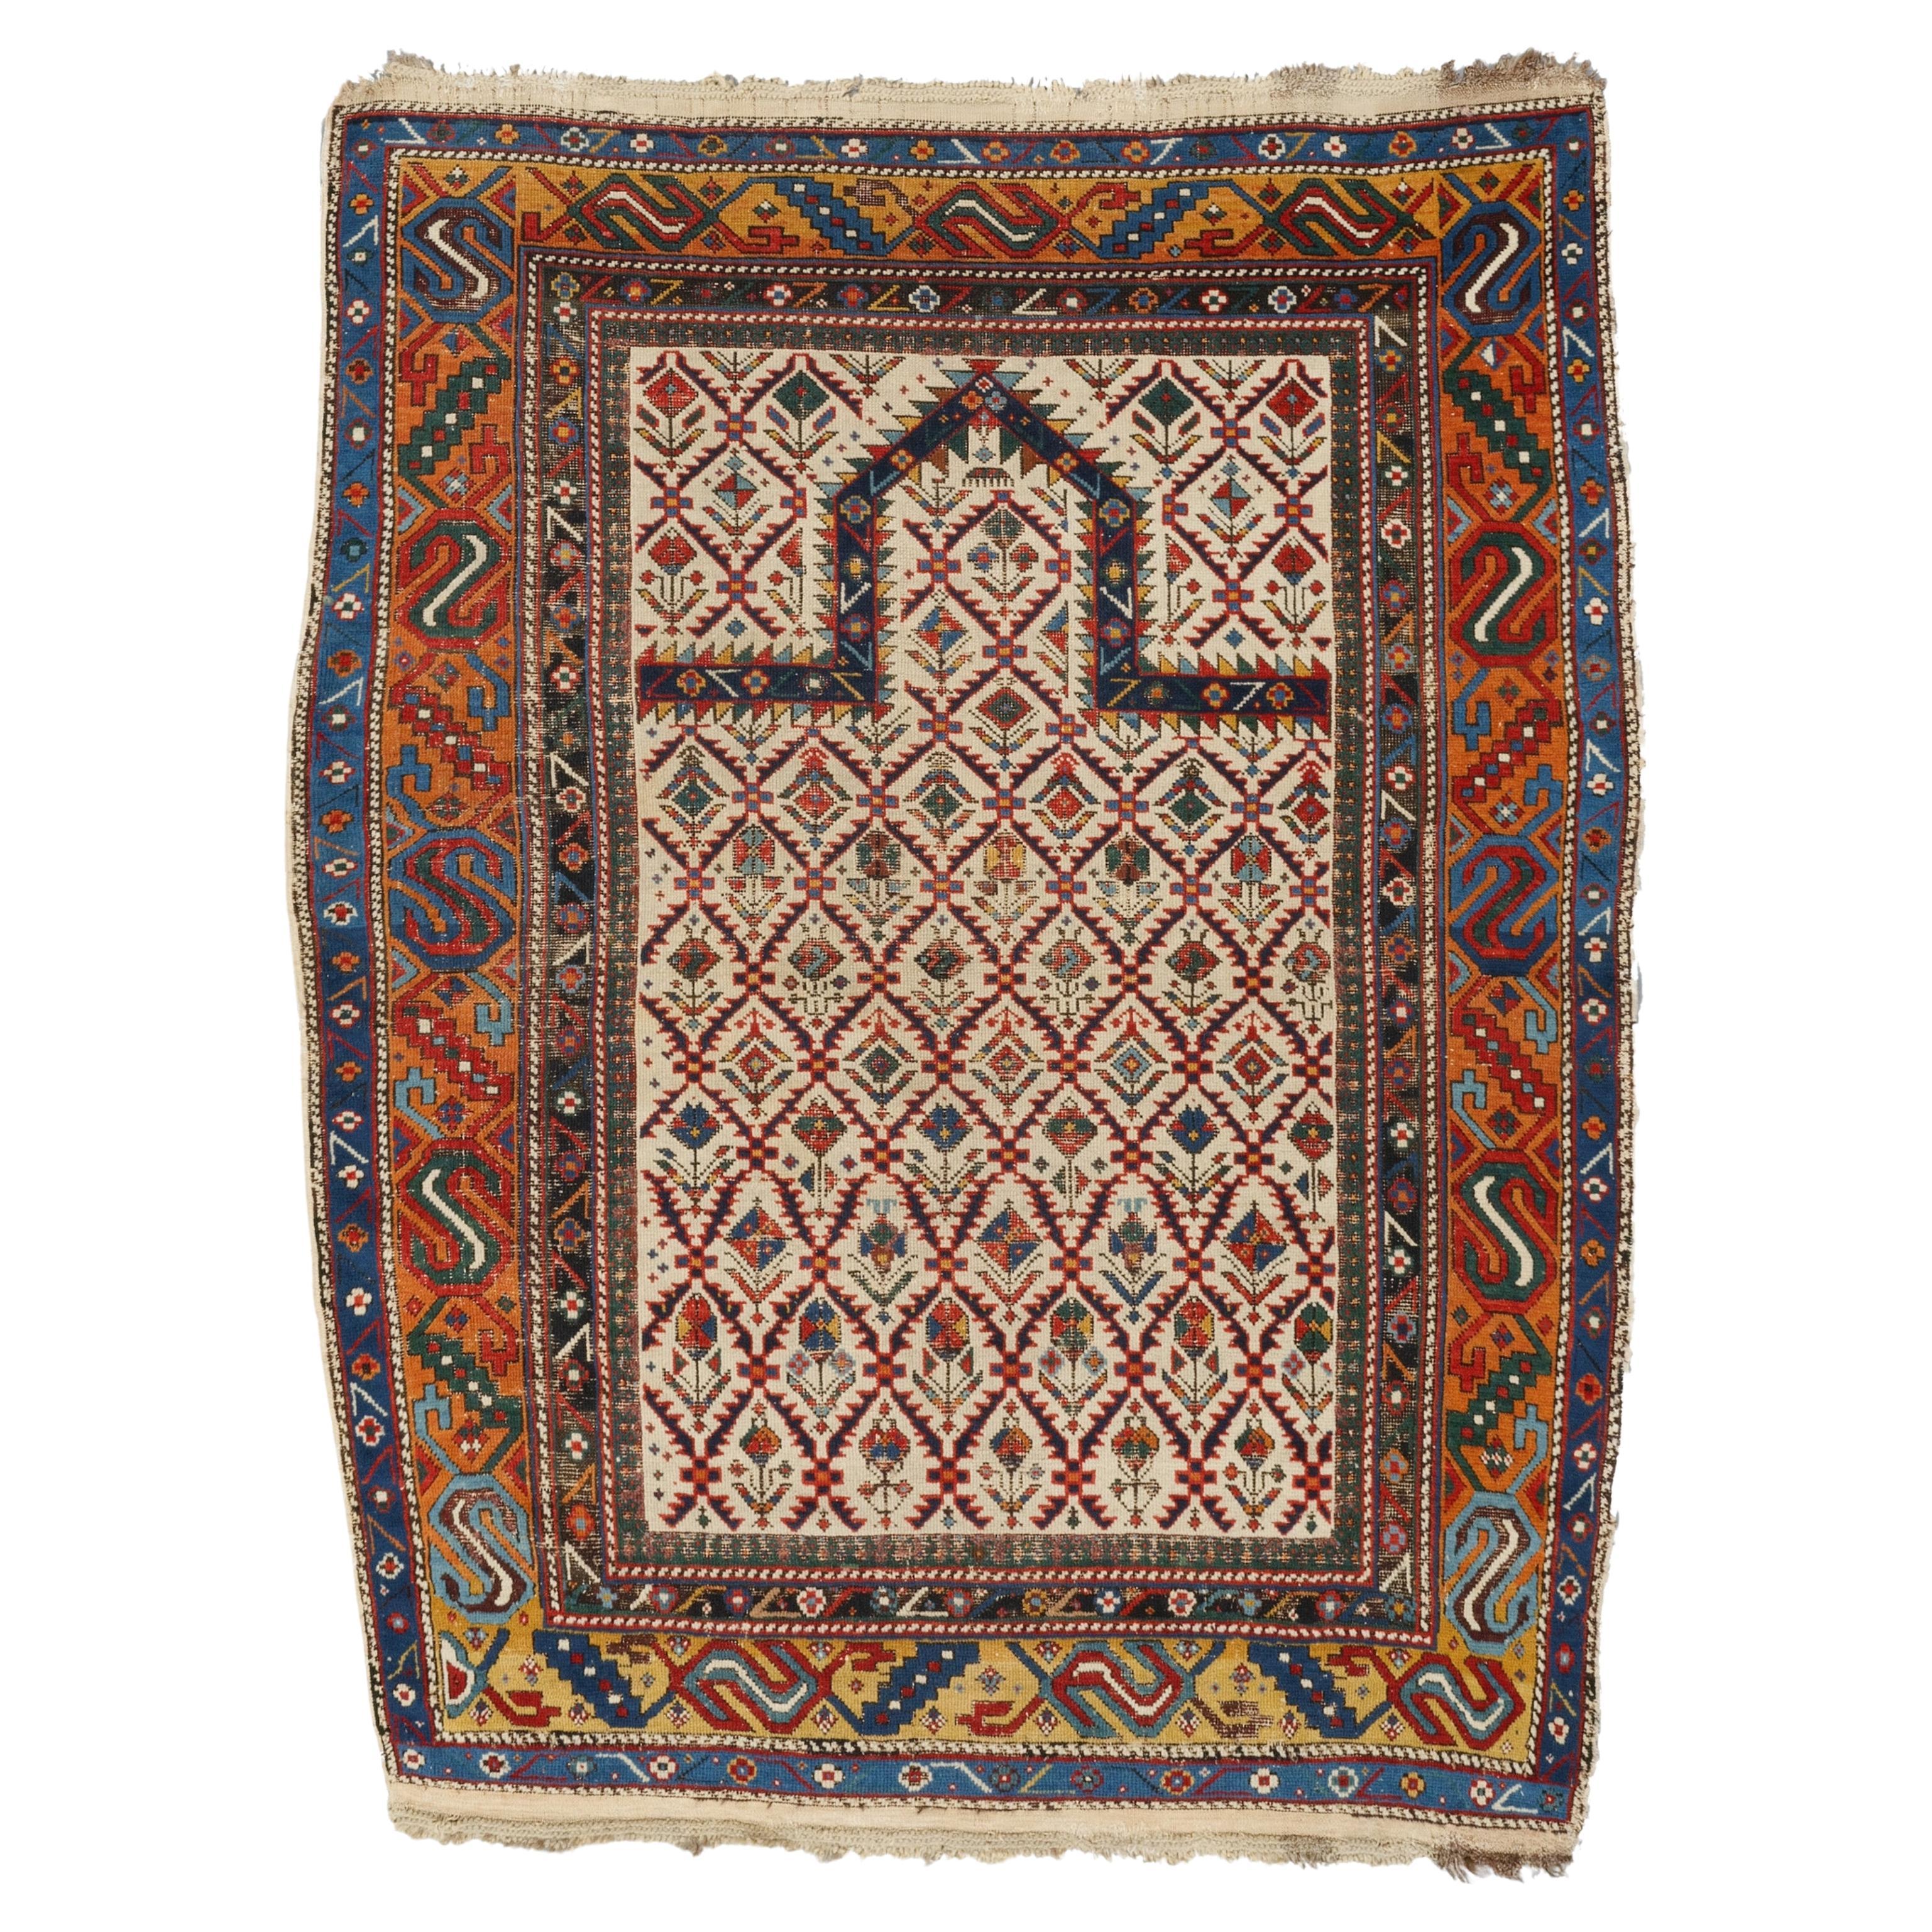 Antique Shirvan Prayer Rug - Late of the 19th Century Shirvan Rug, Antique Rug For Sale